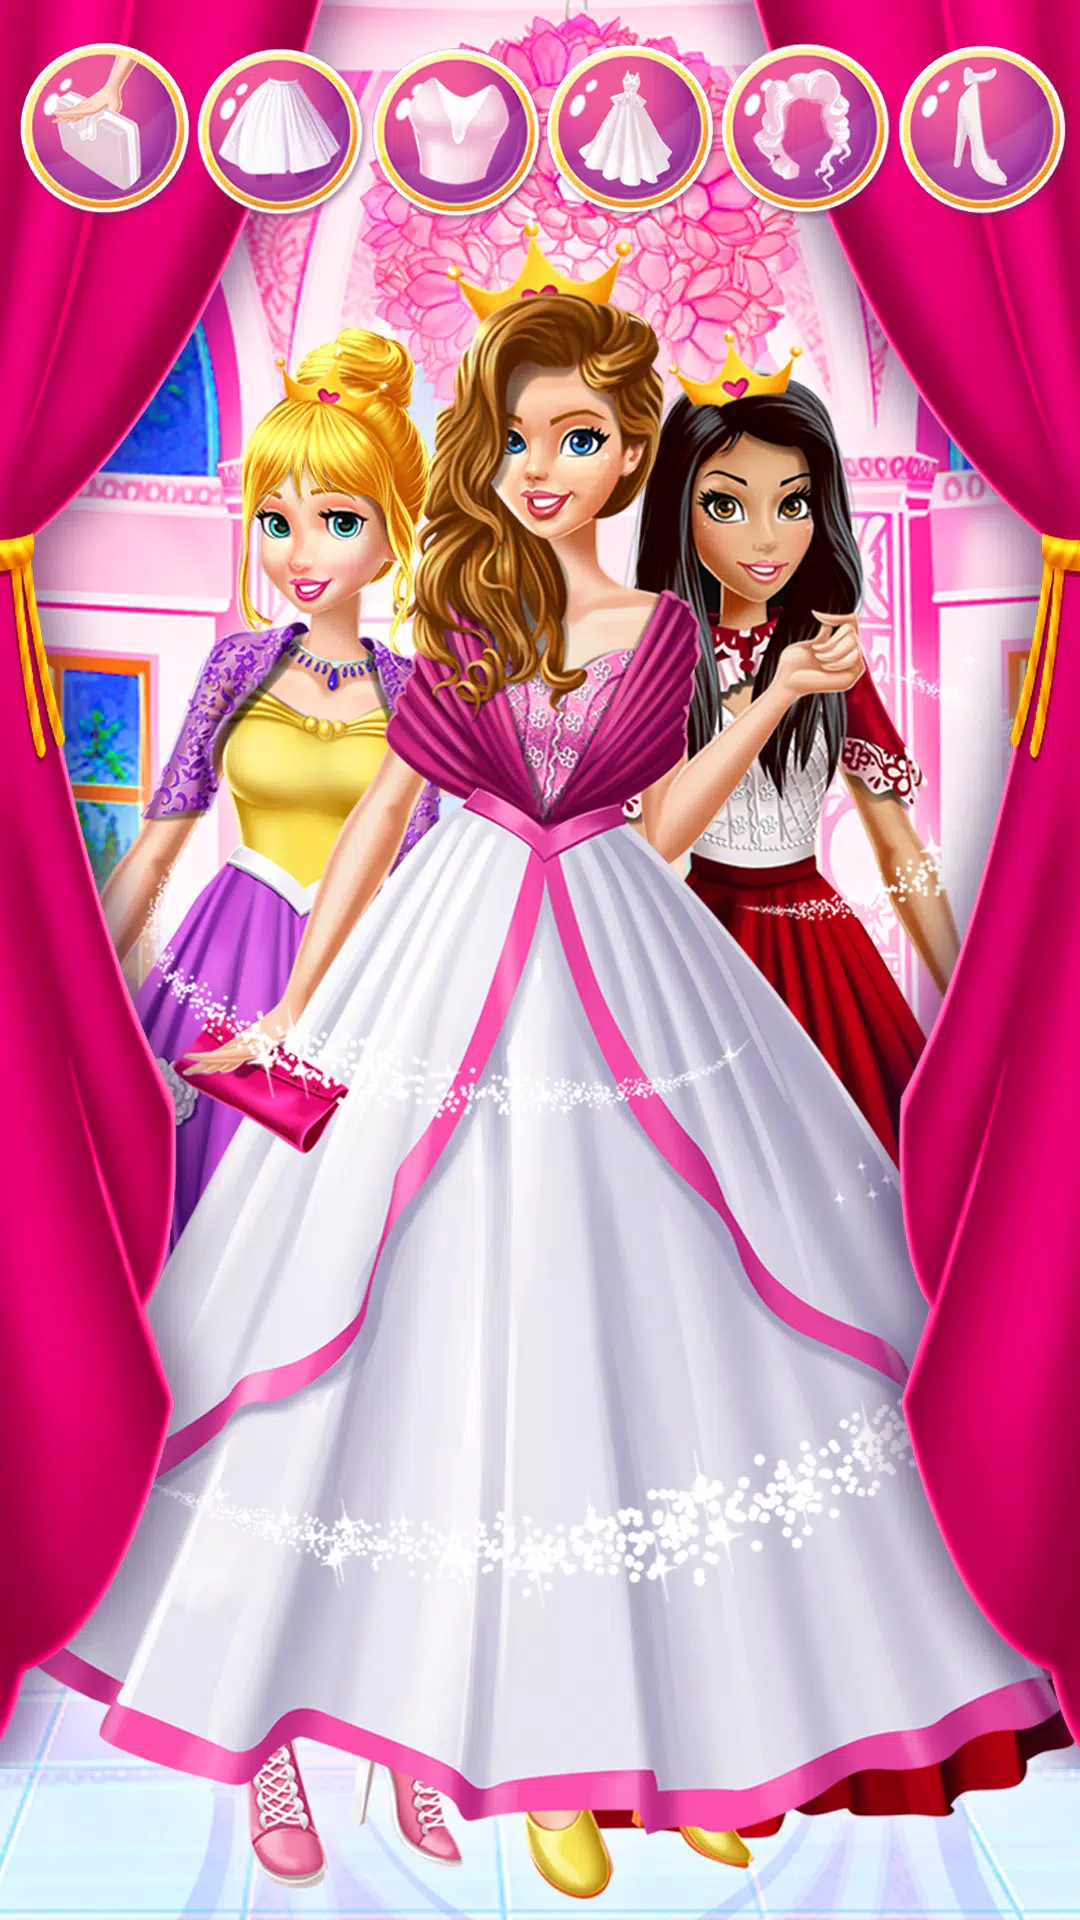 Princess Doll - Dress Up Game on the App Store